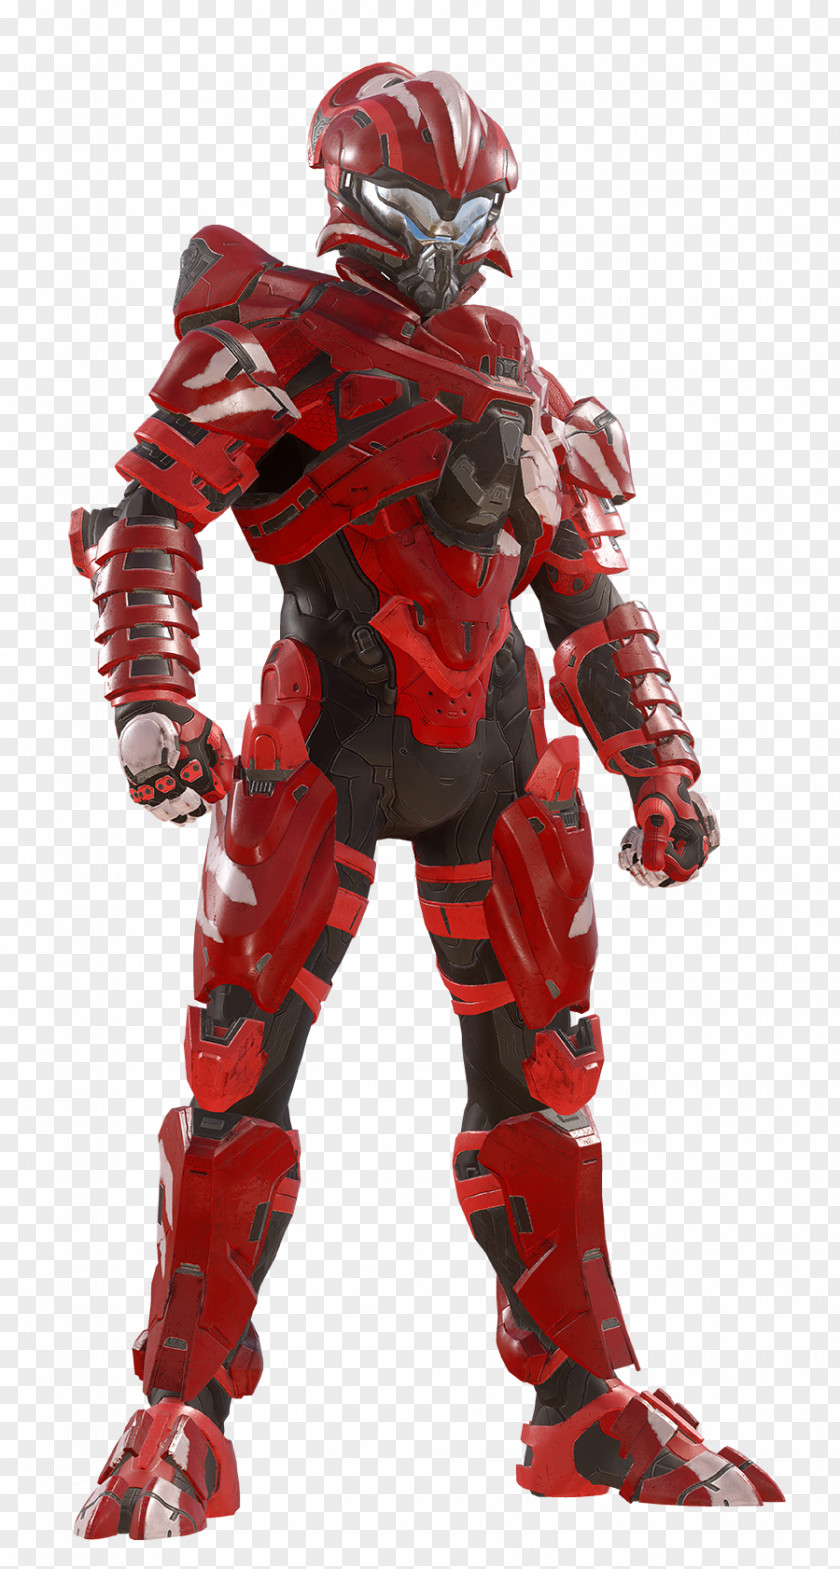 Halo 5: Guardians 4 Halo: Reach The Master Chief Collection Spartan Assault PNG